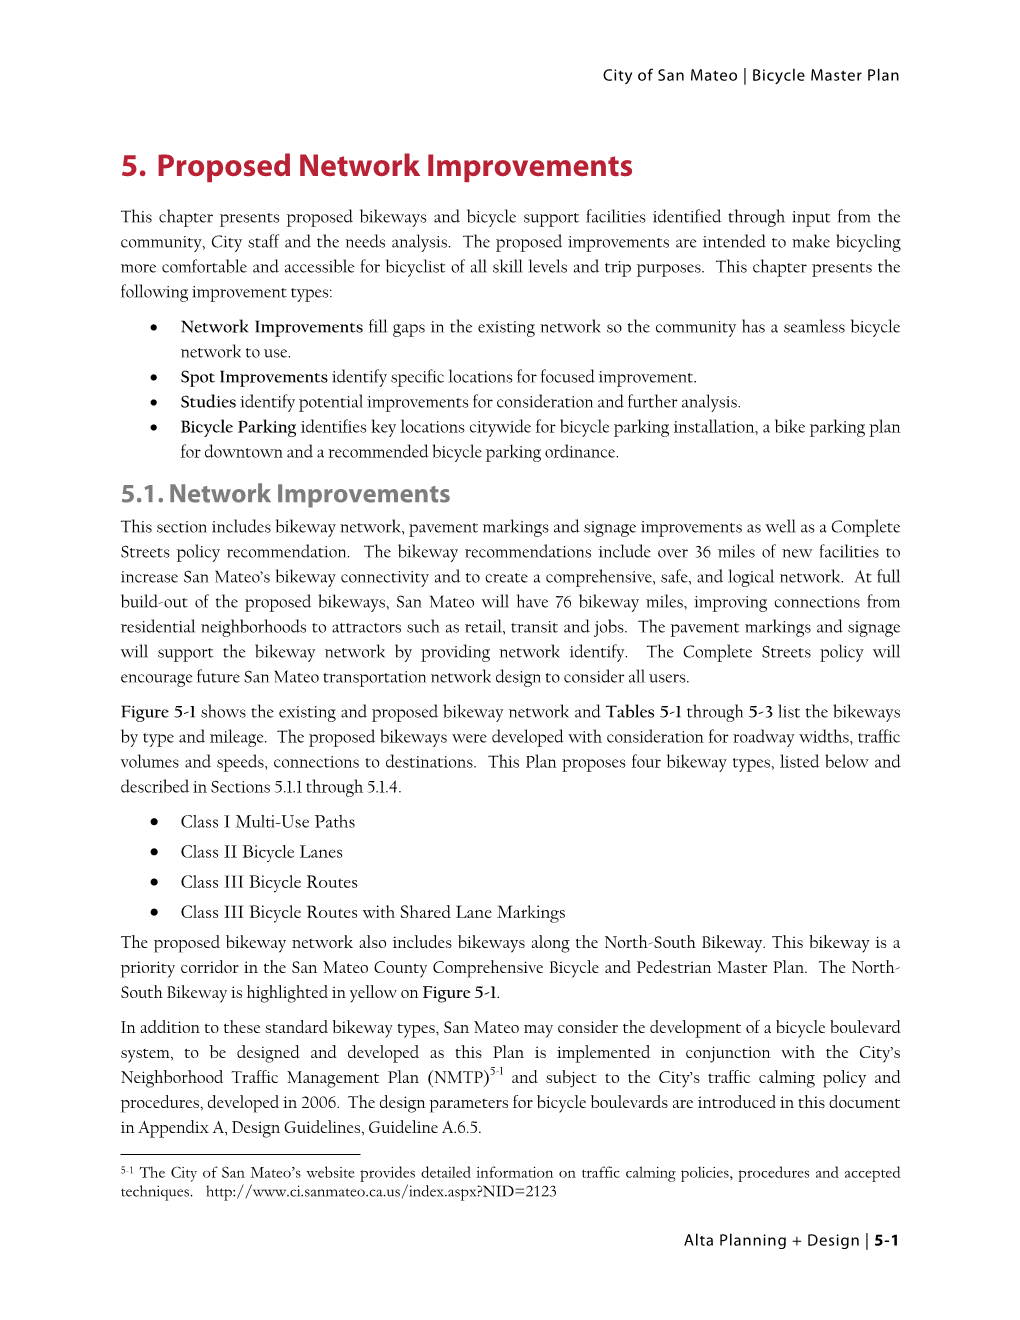 5. Proposed Network Improvements